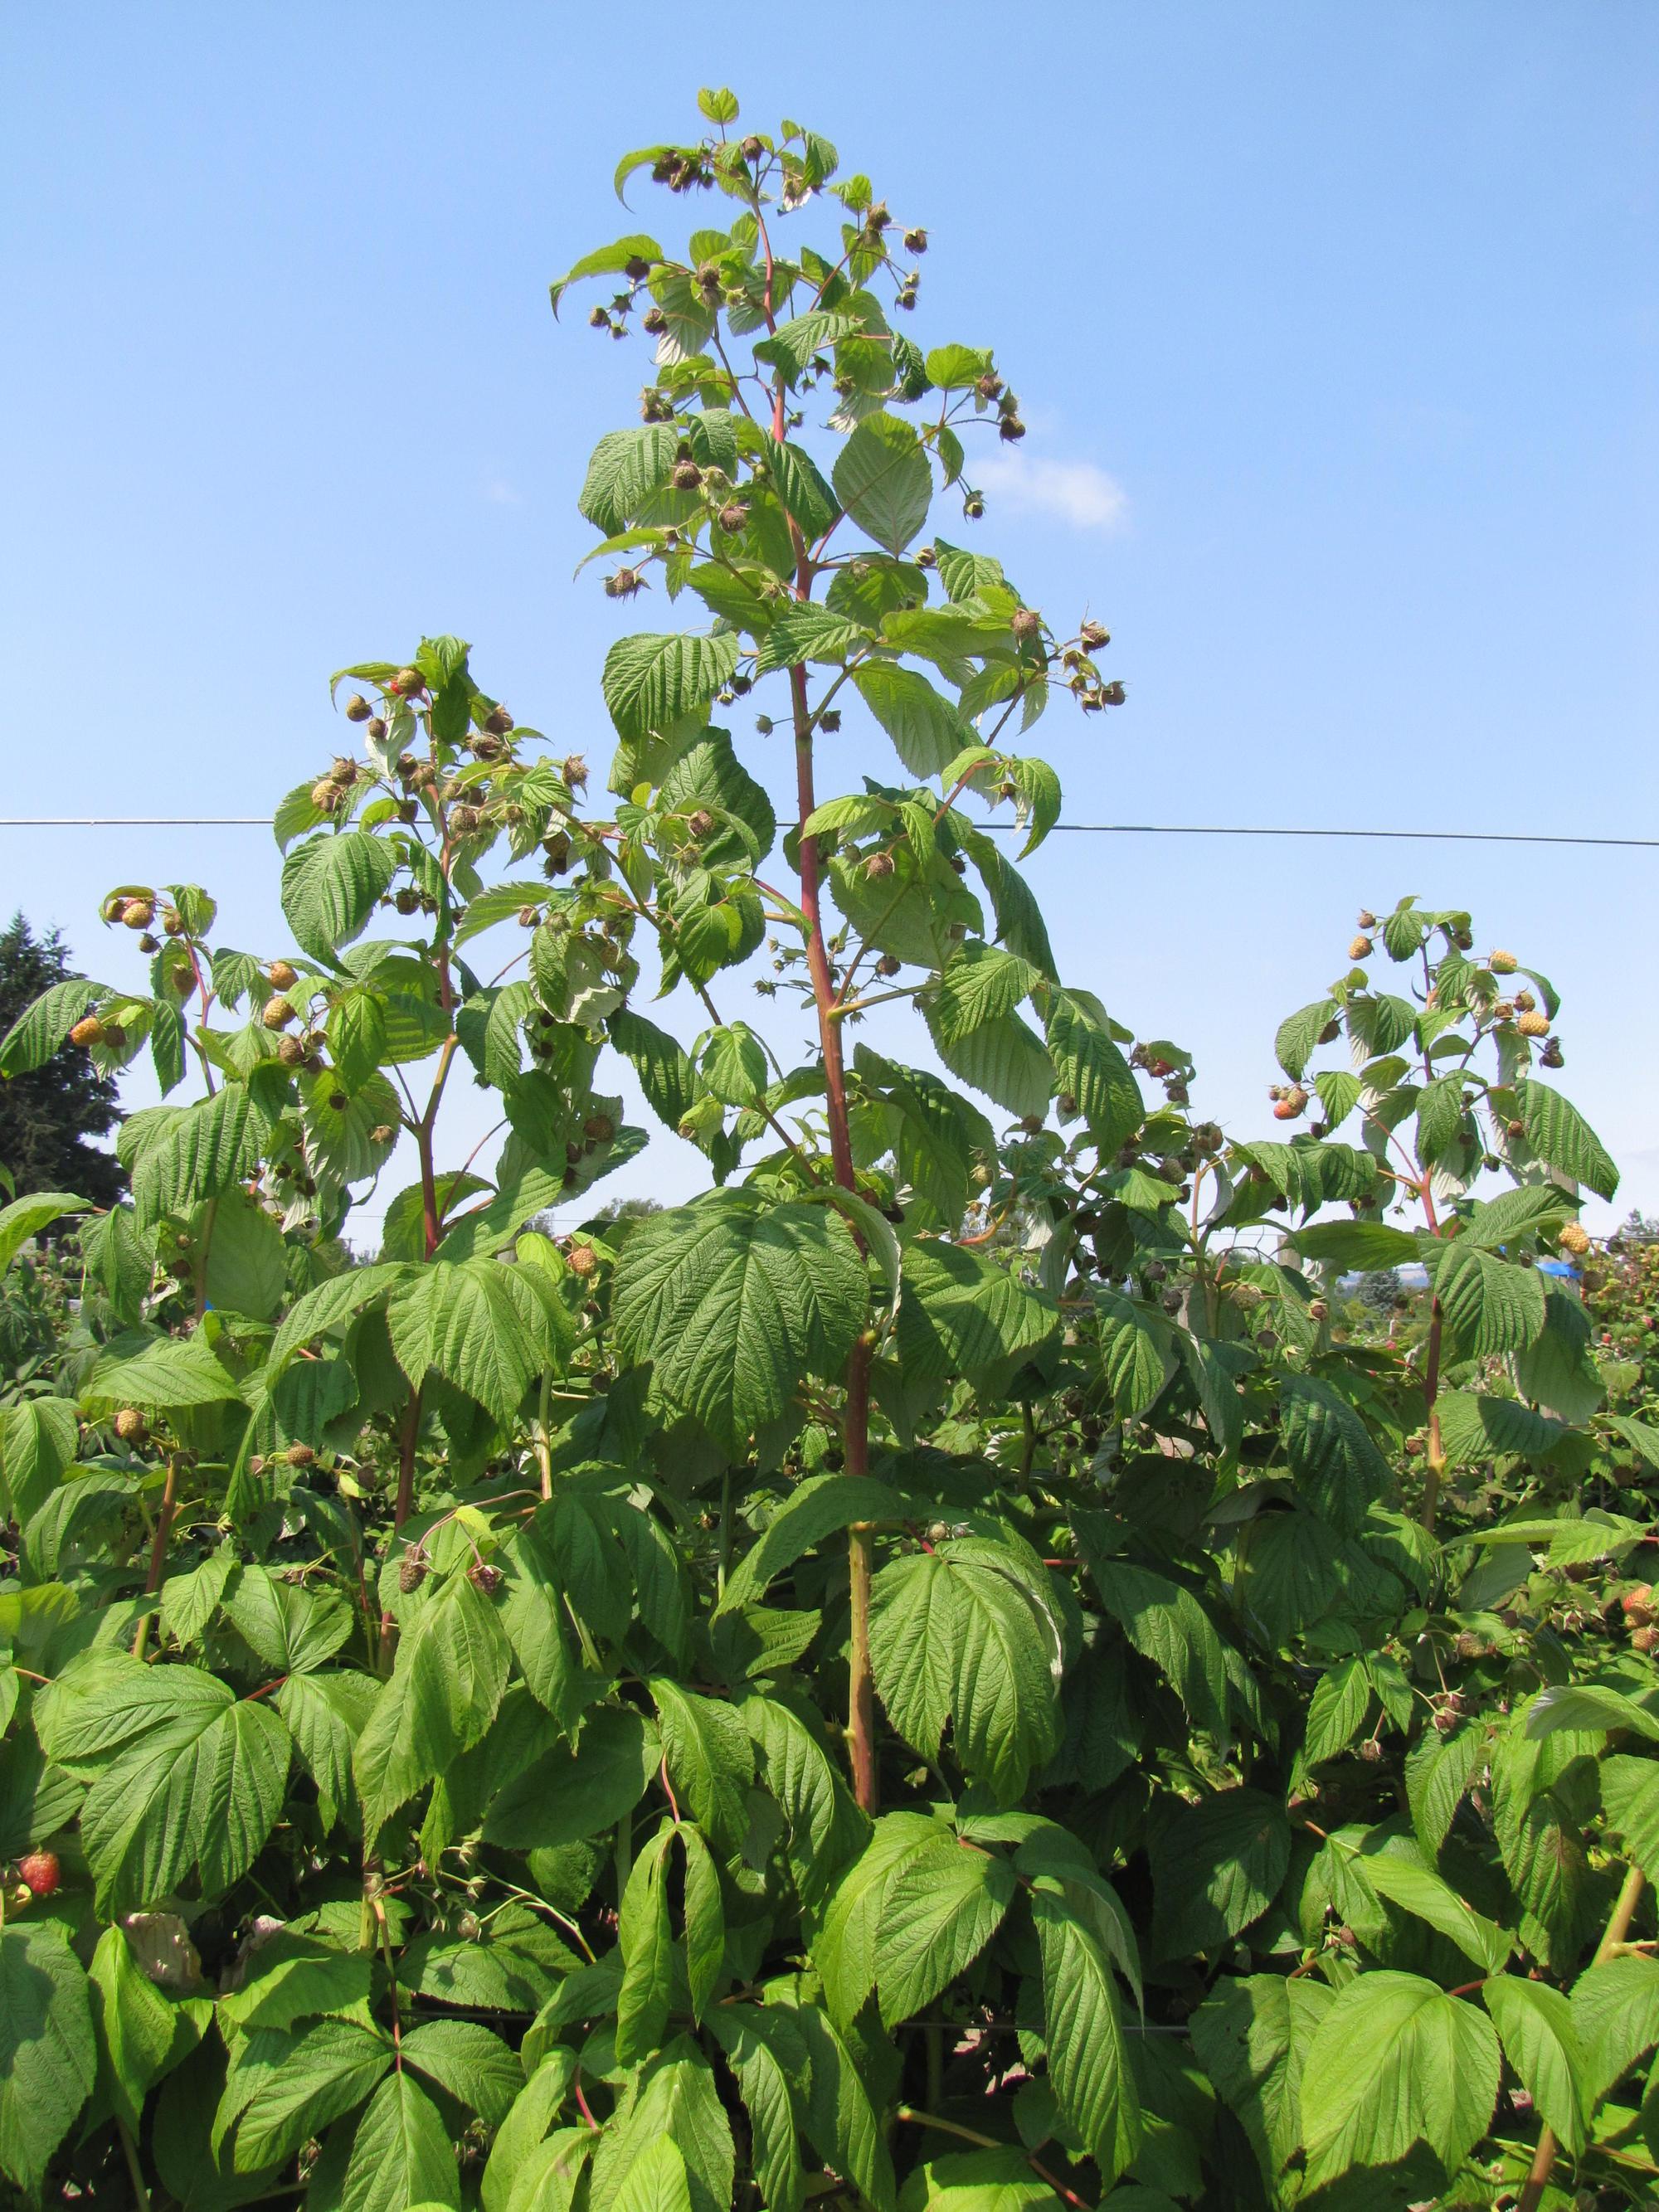 red raspberry in summer showing fruit developing at the tip of primocanes.